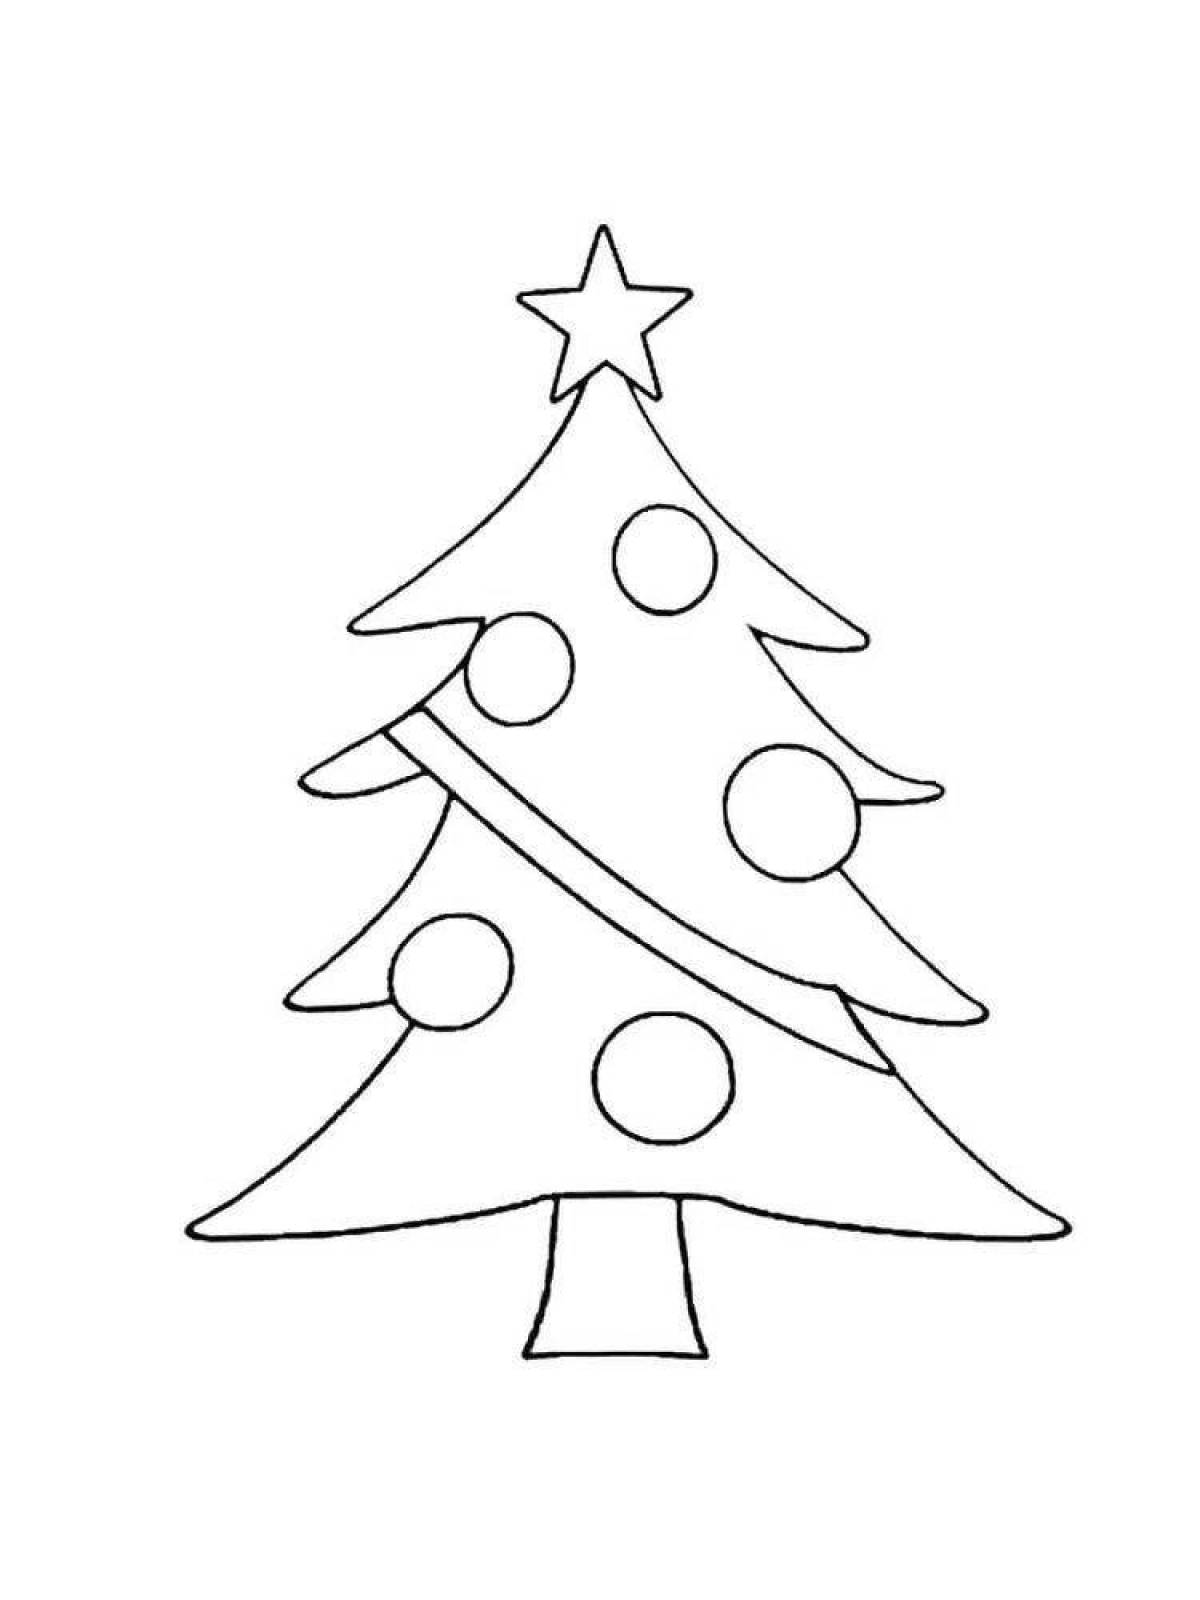 Little Christmas tree creative coloring book